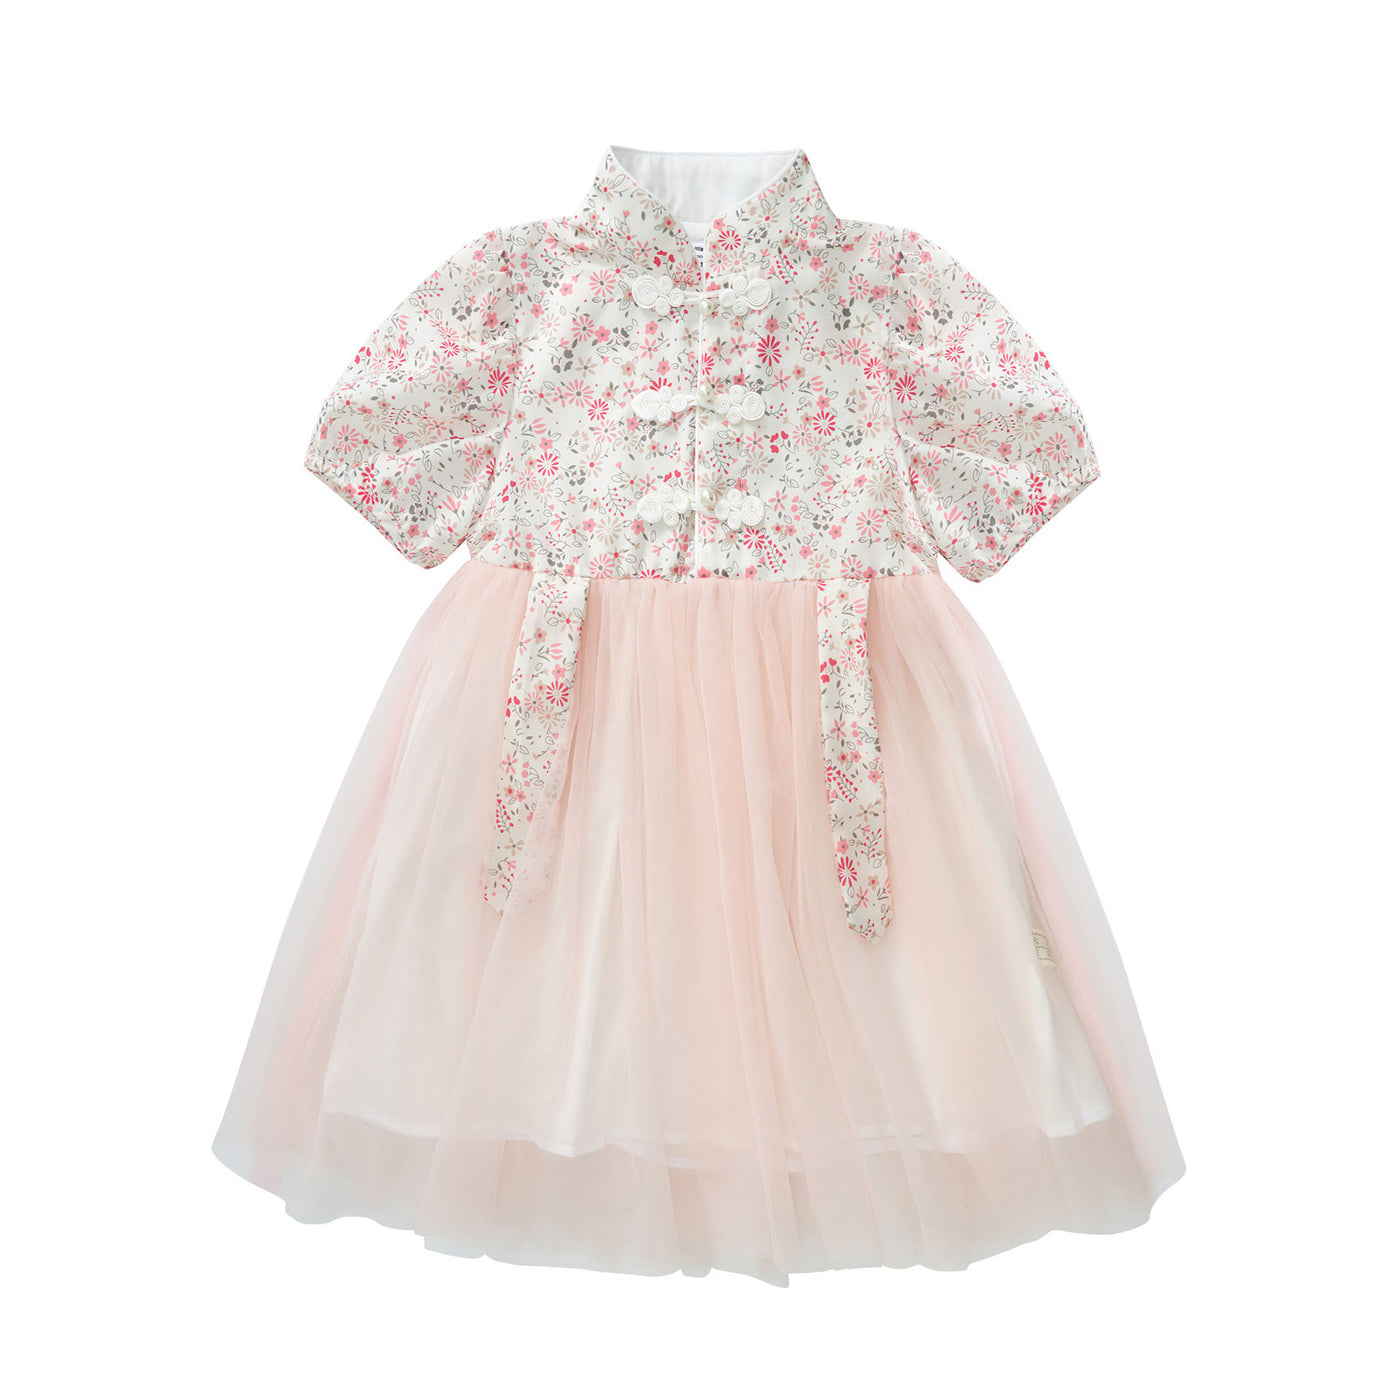 Blossom Harmony Collection Baby Kids Girl Pink Floral Cheongsam Voile Dress Family Wear 0823 - Little Kooma